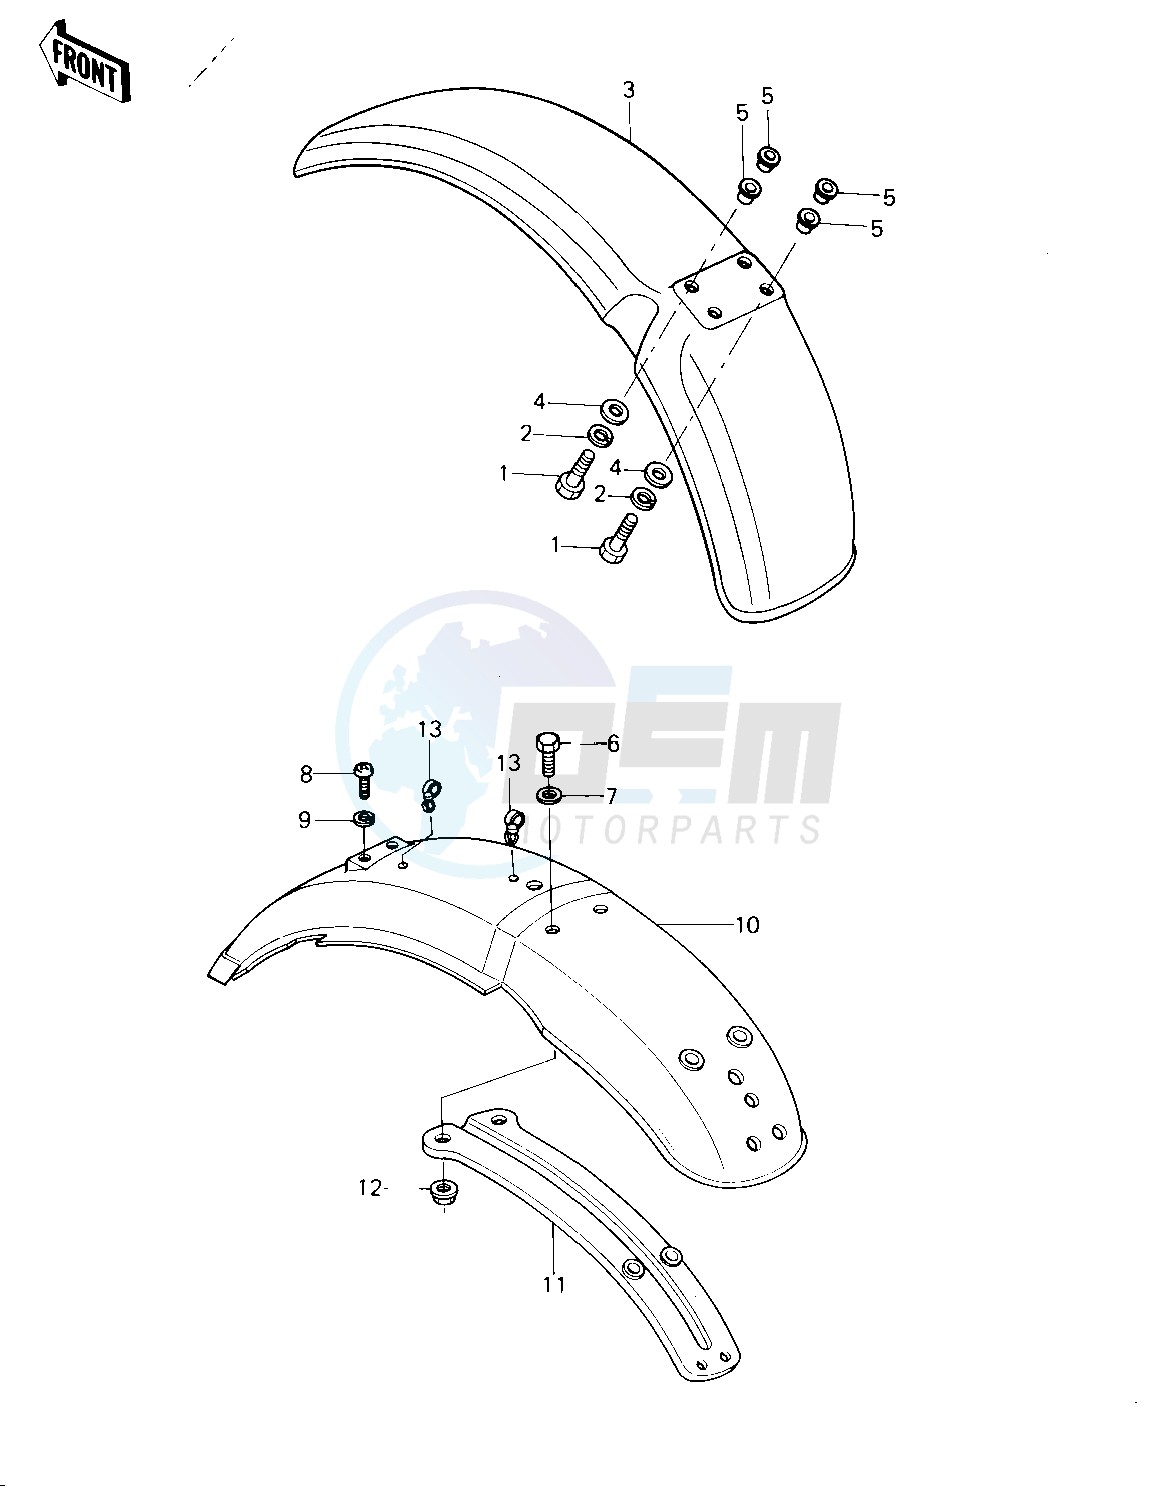 FENDERS -- 80-81 KL250-A3_A4- - image